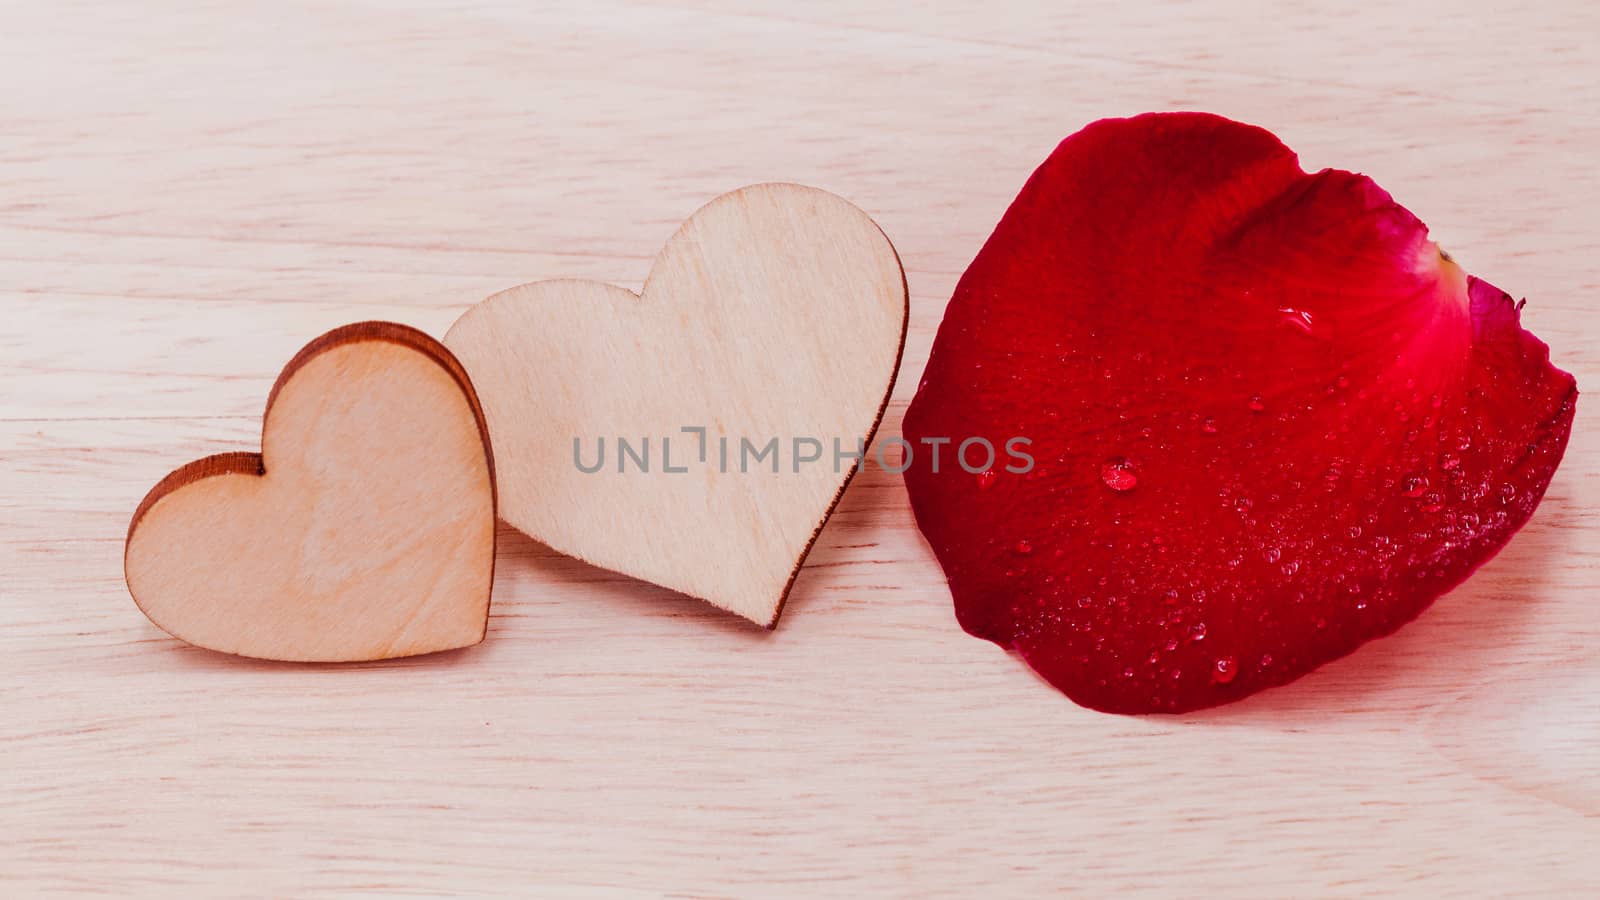 The wooden hearts on wooden background. - Concept for love and w by kerdkanno